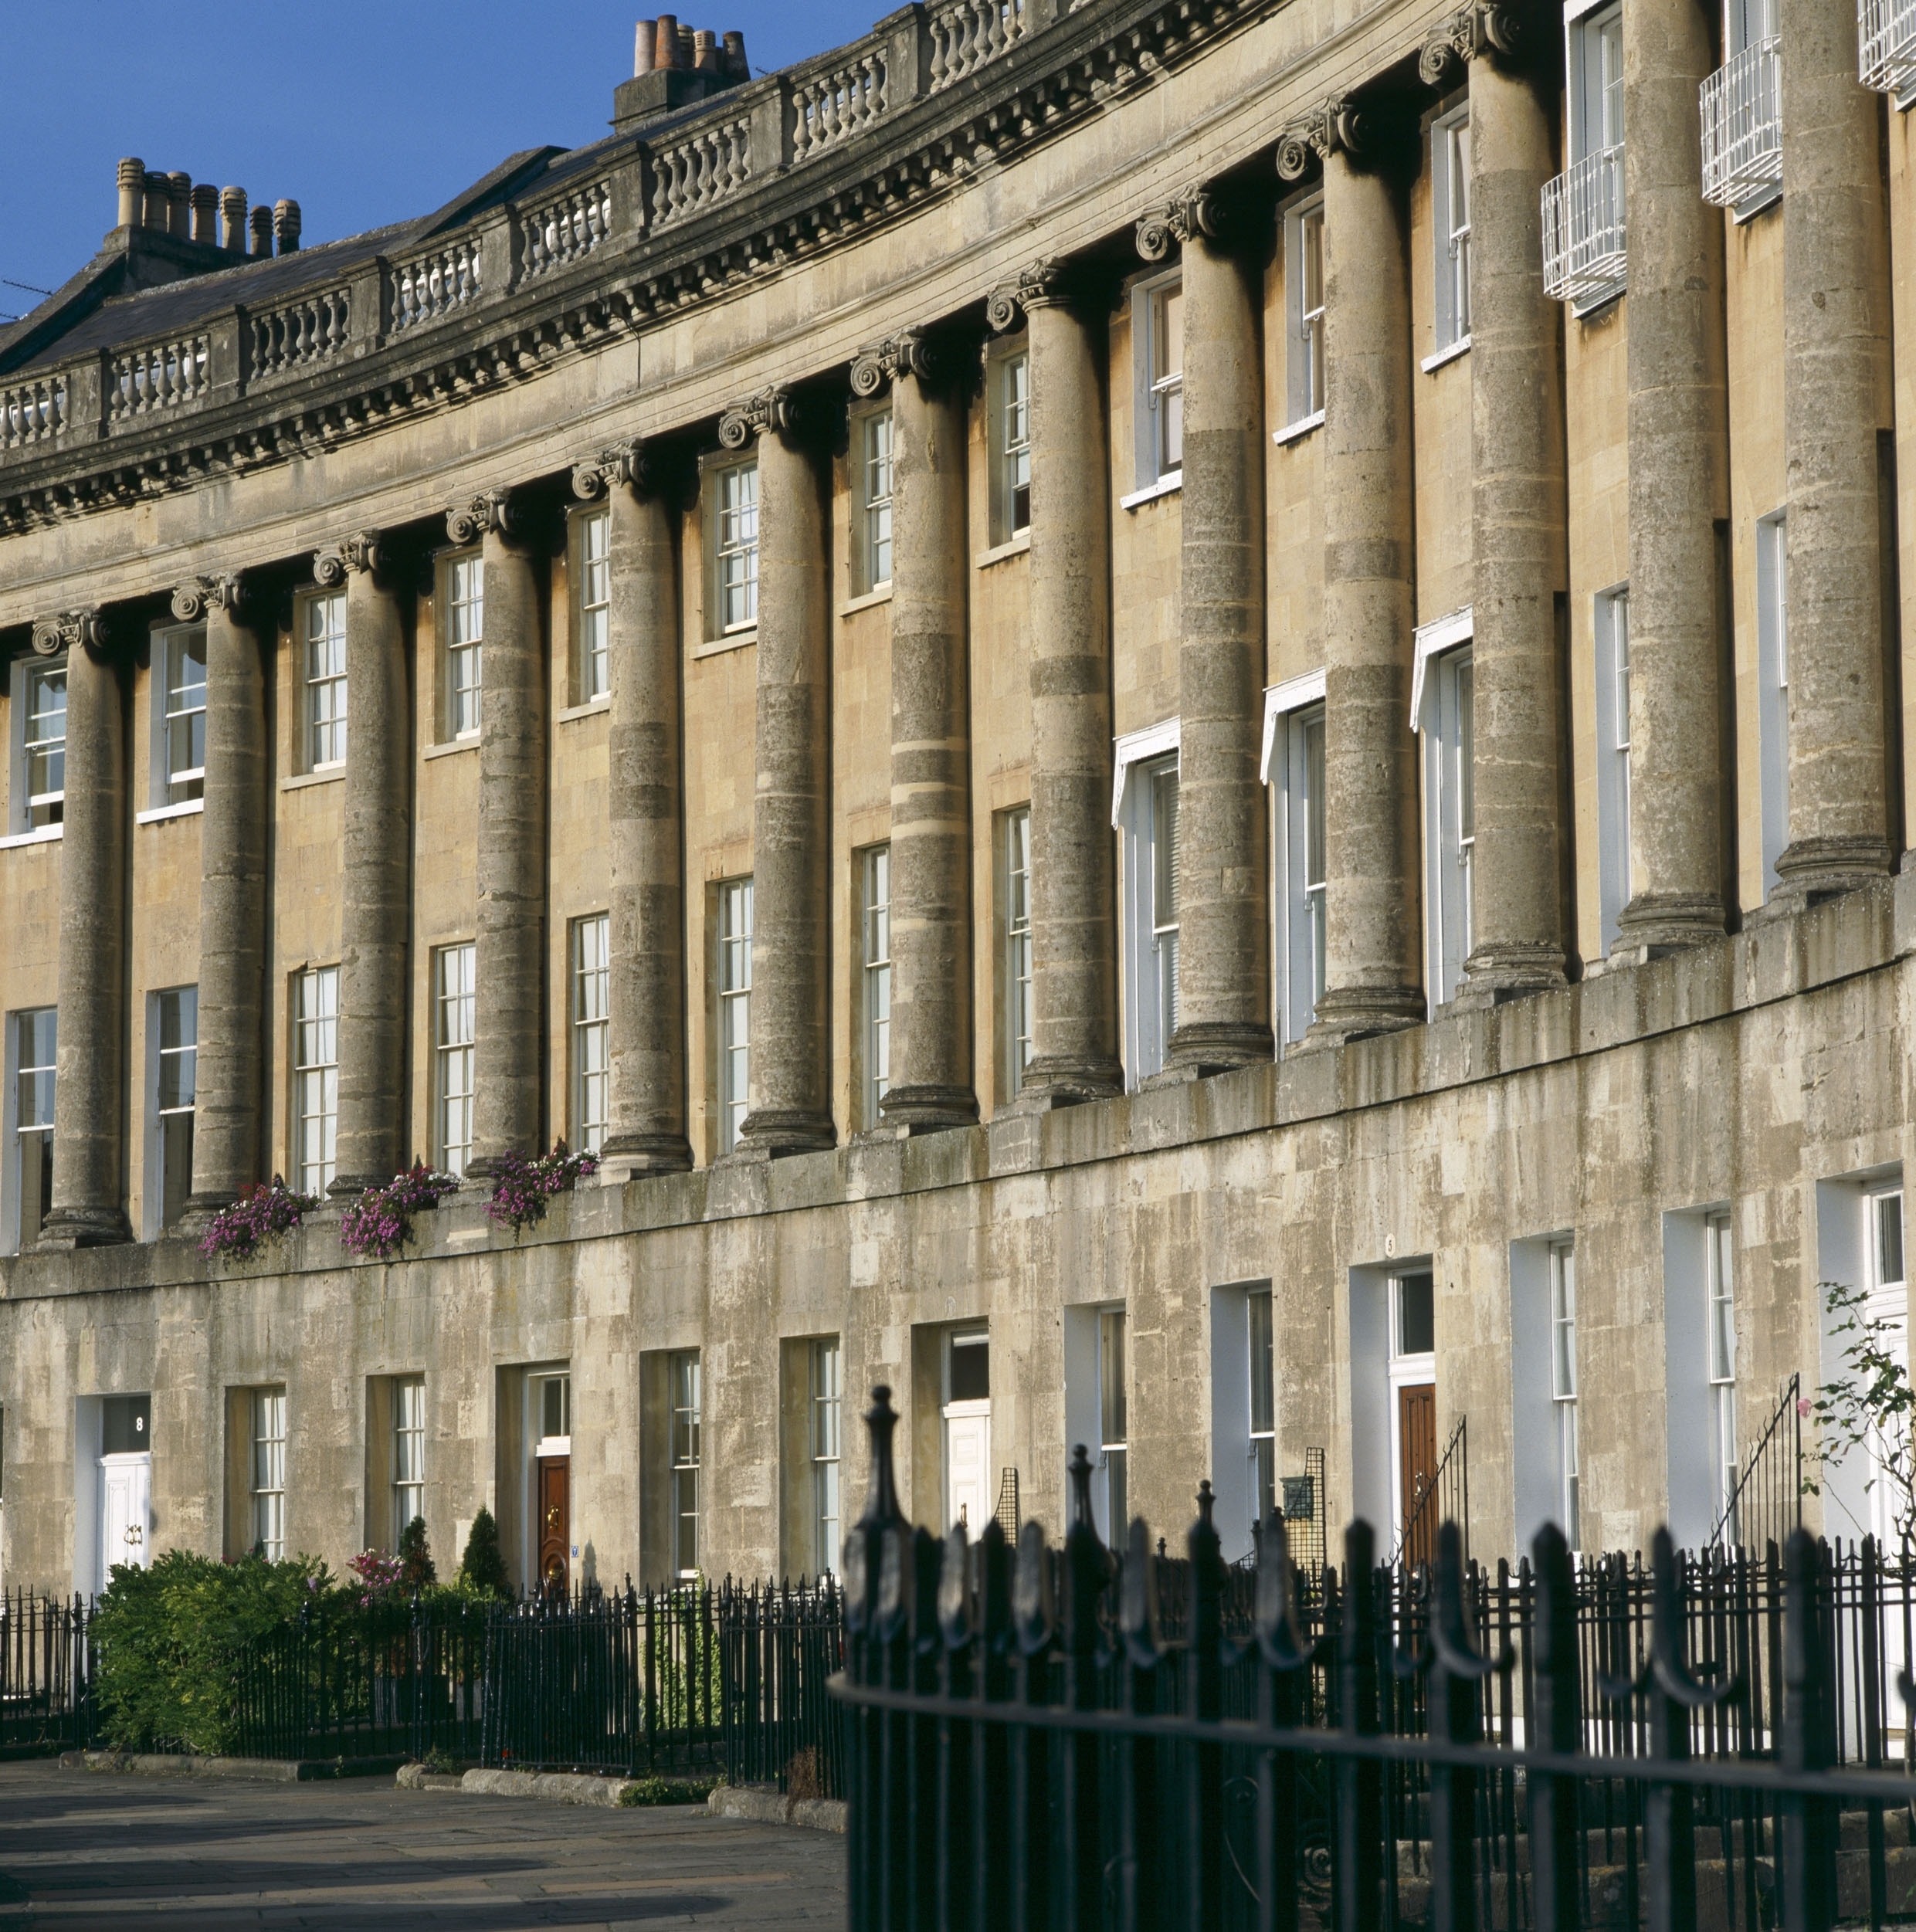 Image of the Royal Crescent in Bath